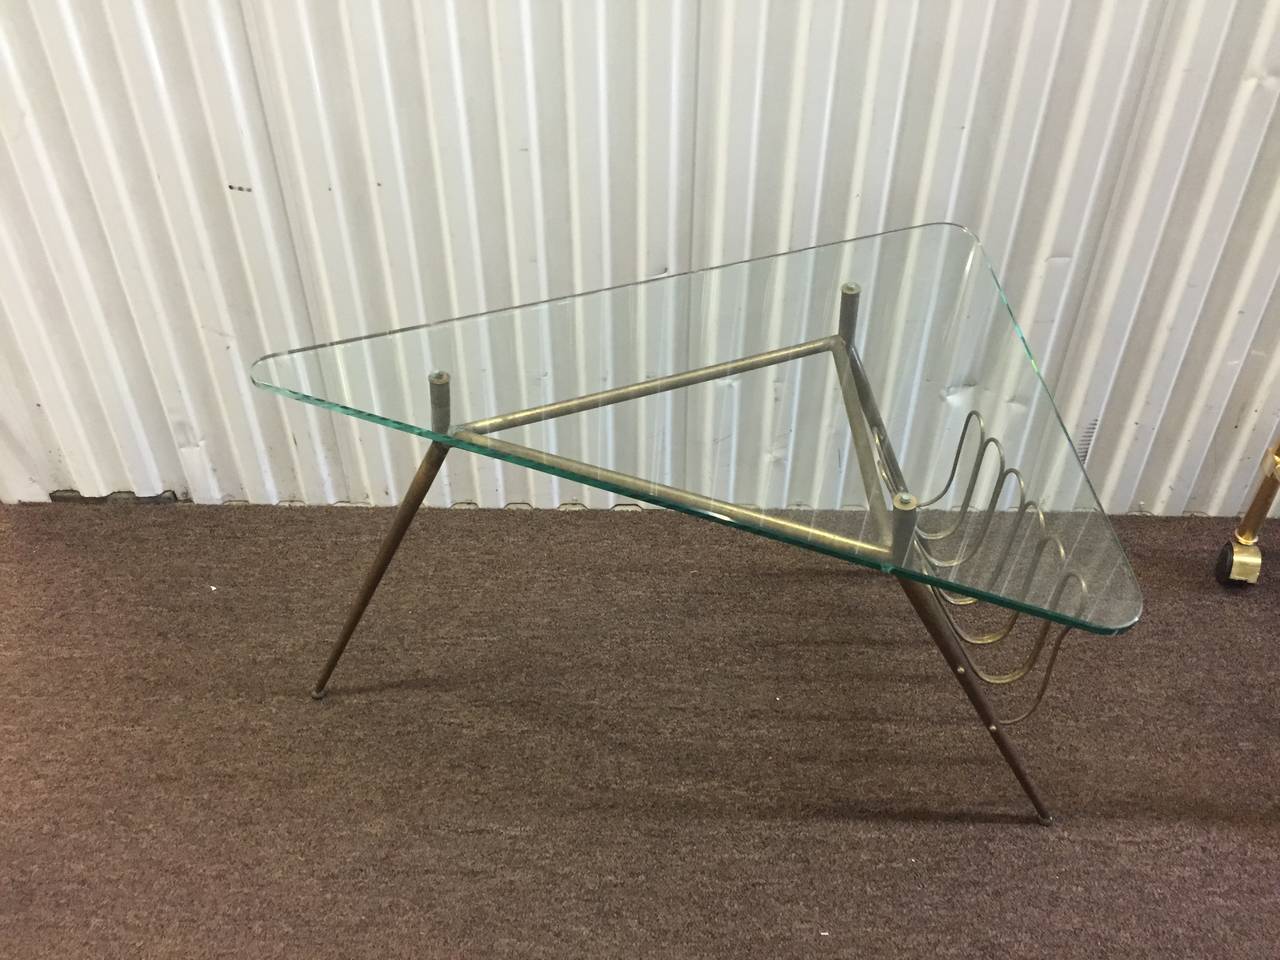 A vintage 1960s Gio Ponti style brass coffee or cocktail table with magazine rack and 1/2 inch thick triangular glass top. Good vintage condition with age appropriate wear and patina.